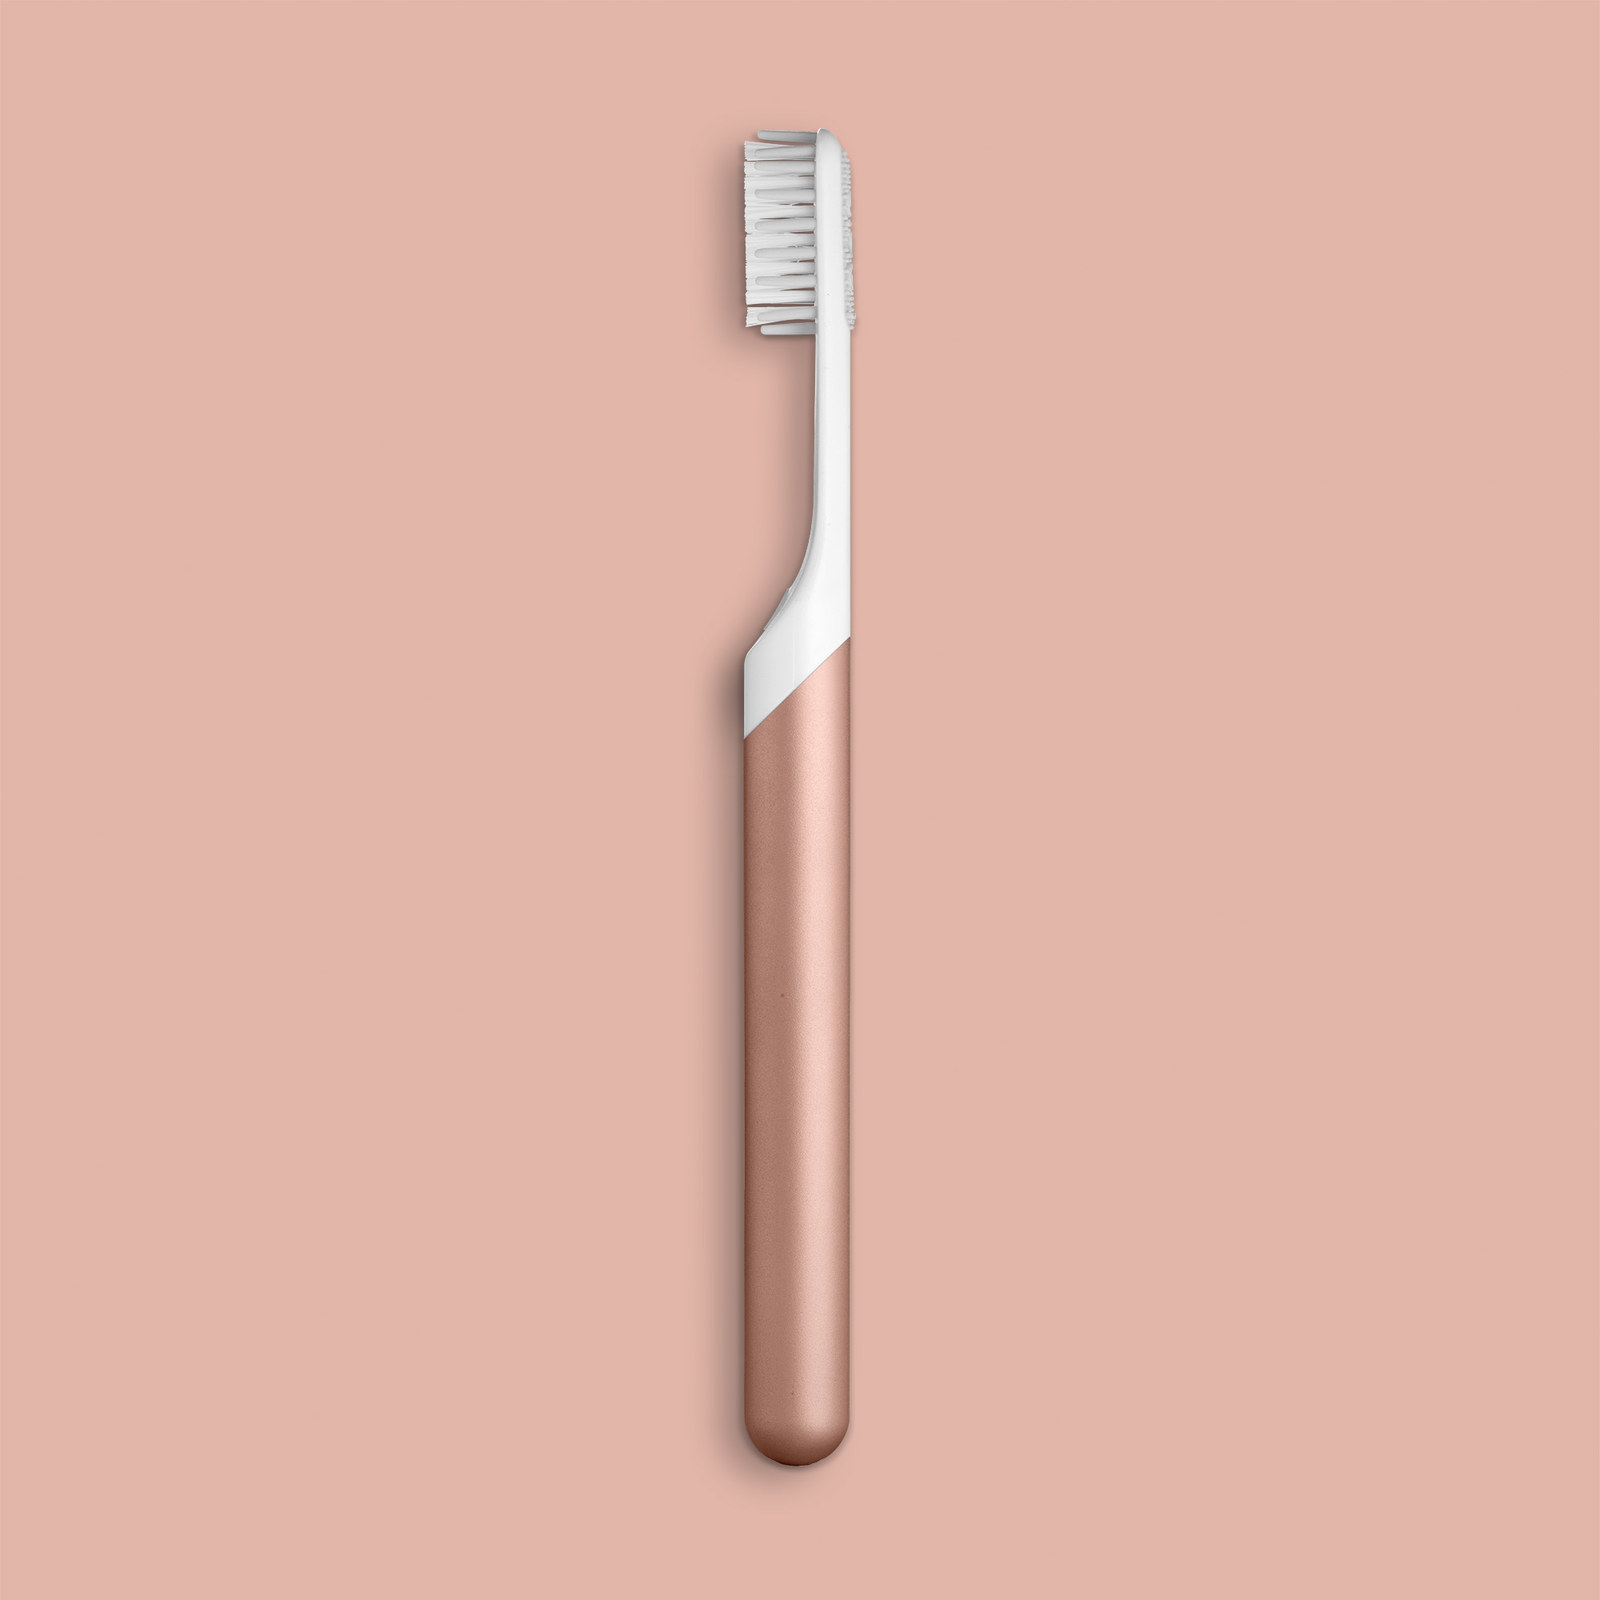 I Tried The Hipster Toothbrush That's All Over Facebook And TBH I ...